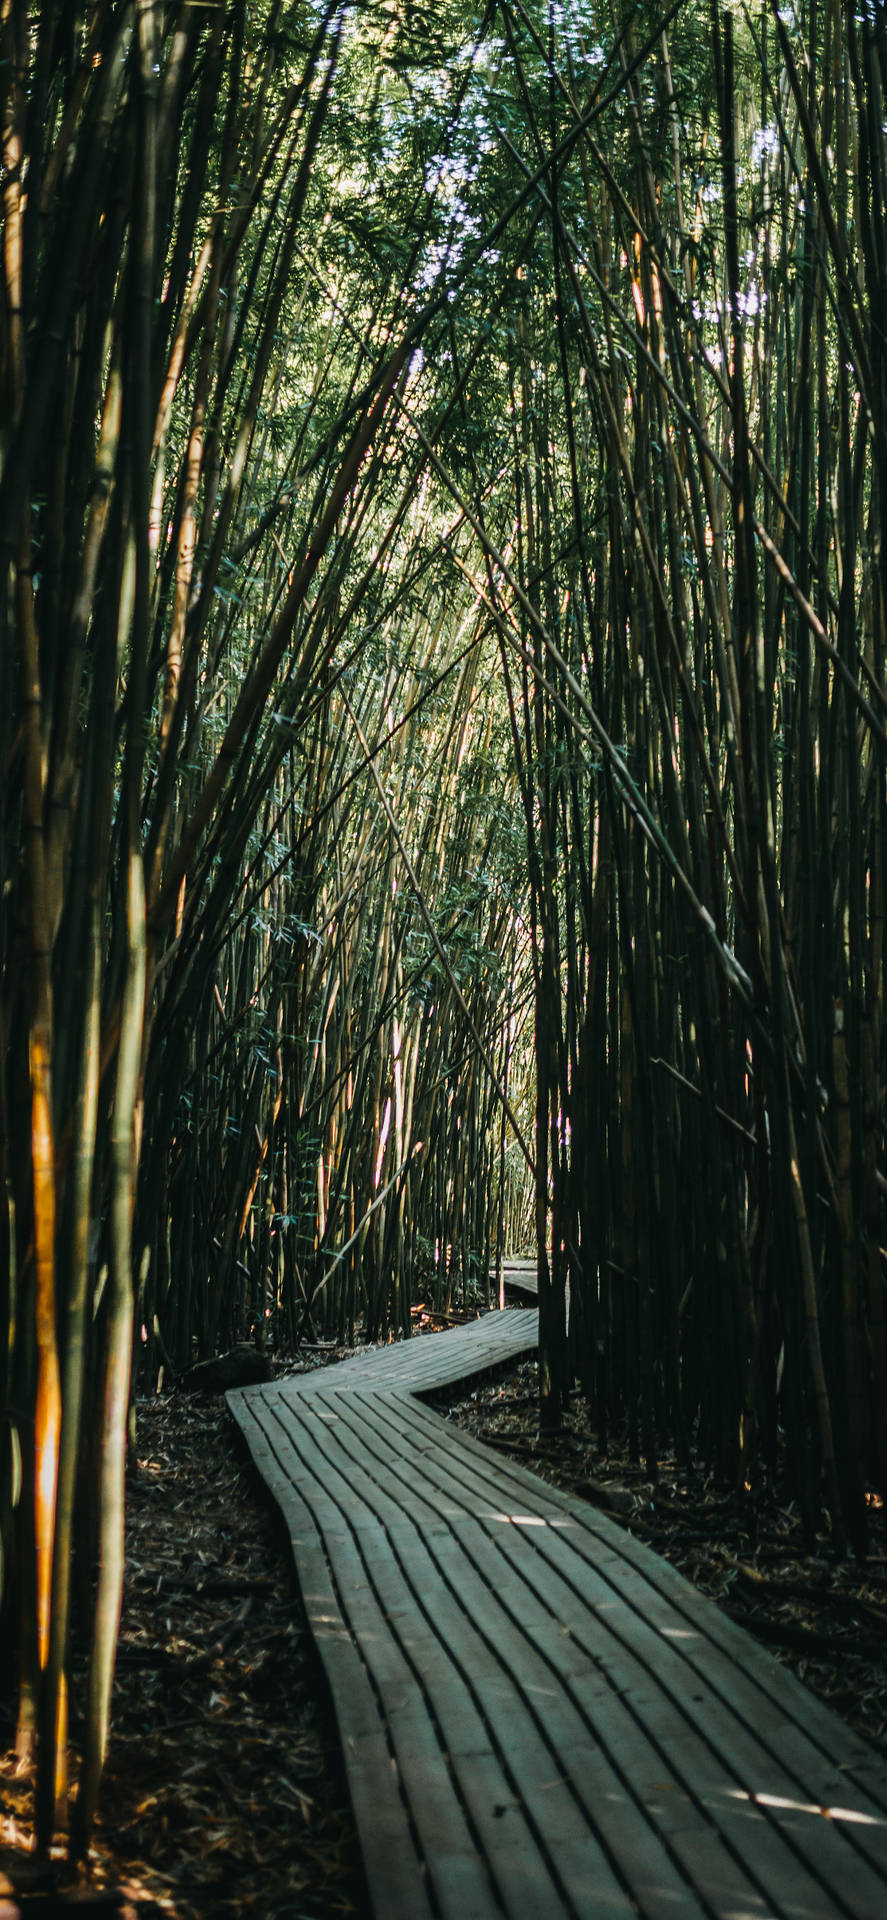 Paved Bamboo Pathway Iphone